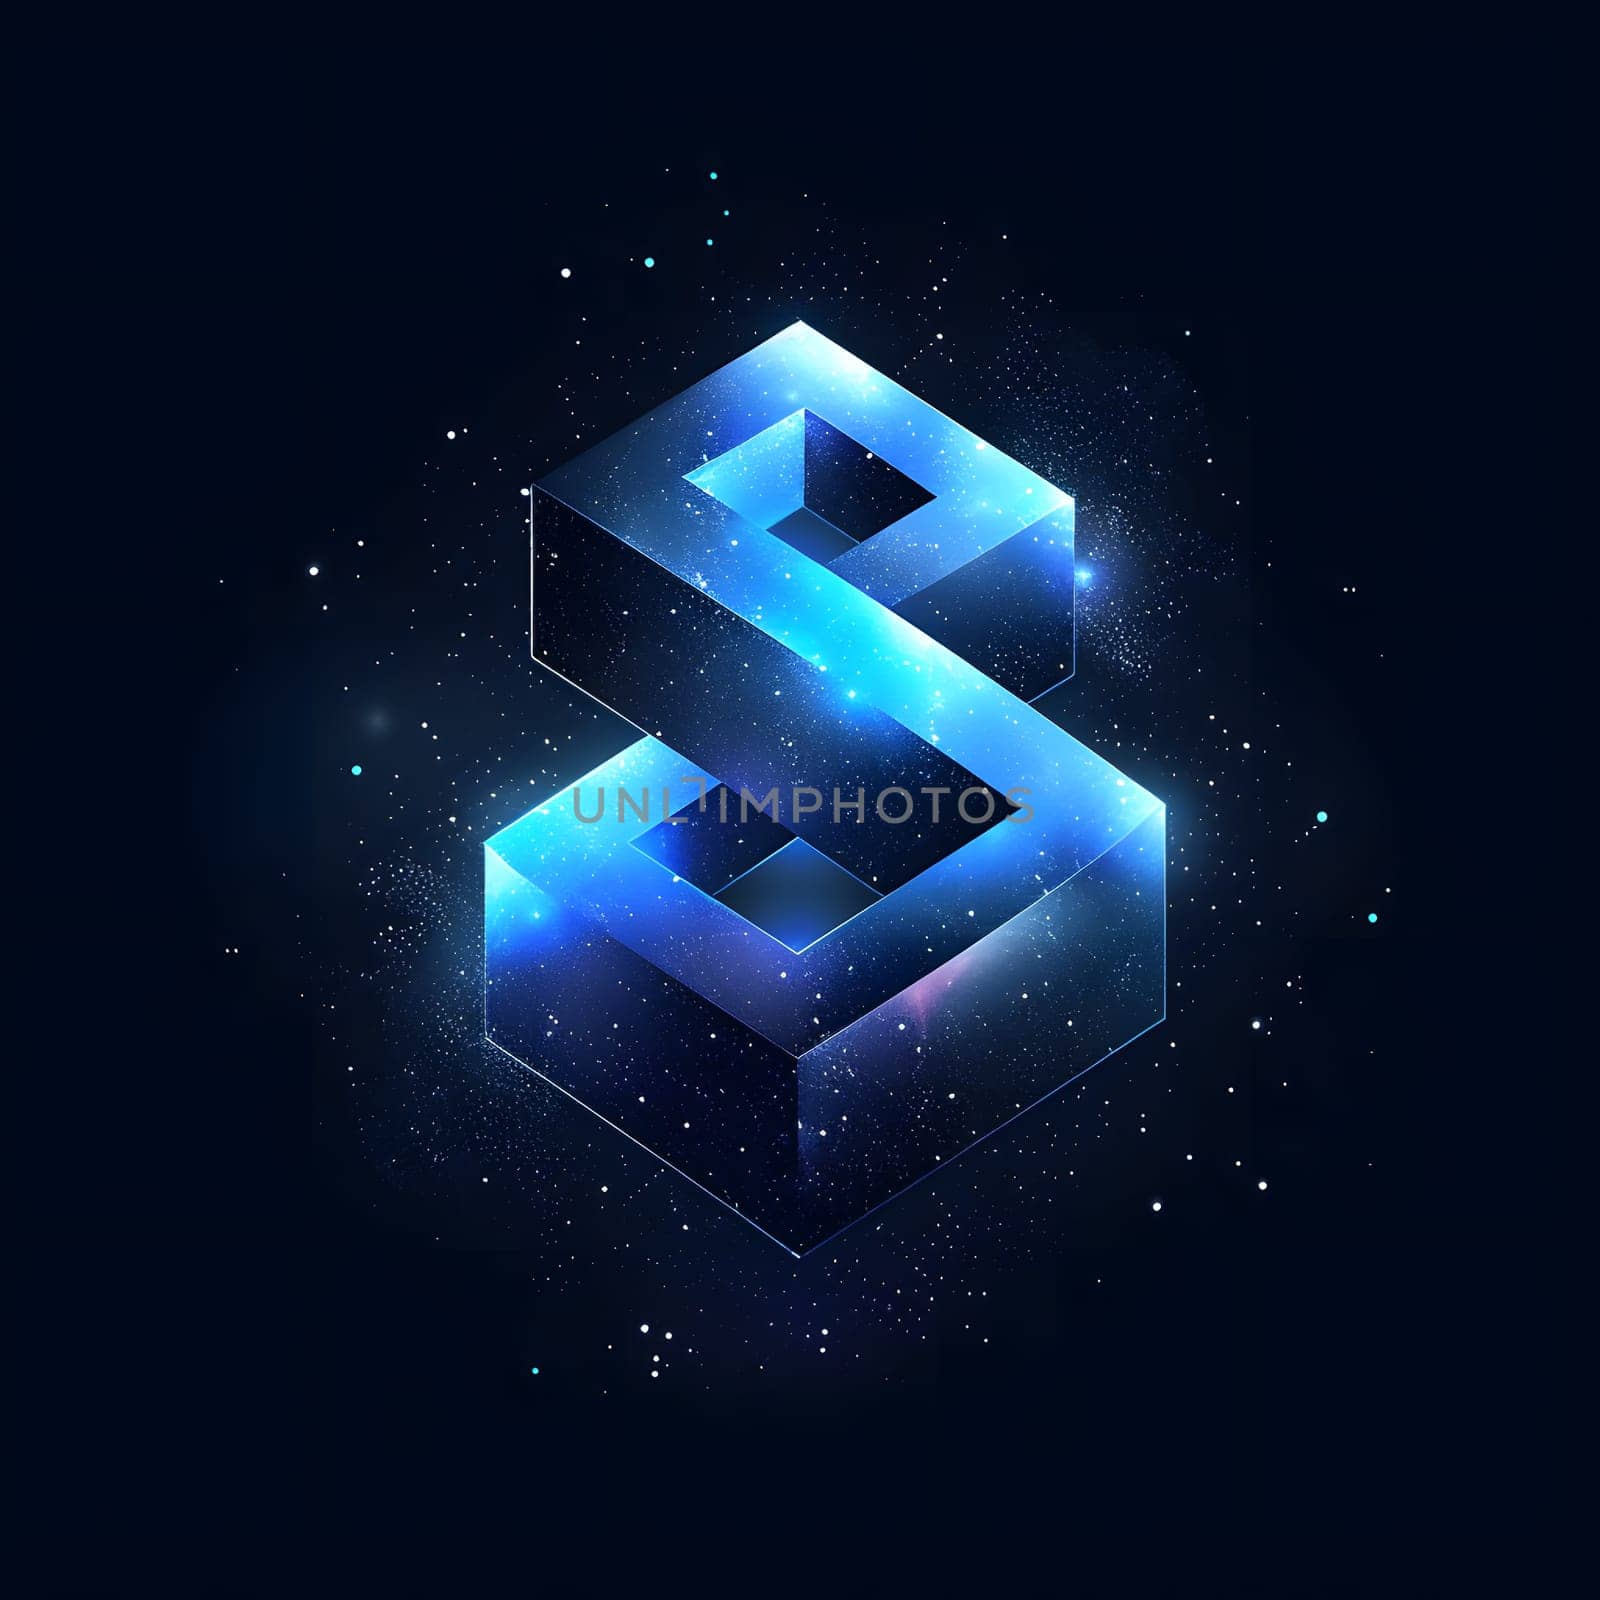 The glowing letter S emits an electric blue hue in the dark, resembling an astronomical object. Its symmetry and visual effect lighting create a captivating logo art piece